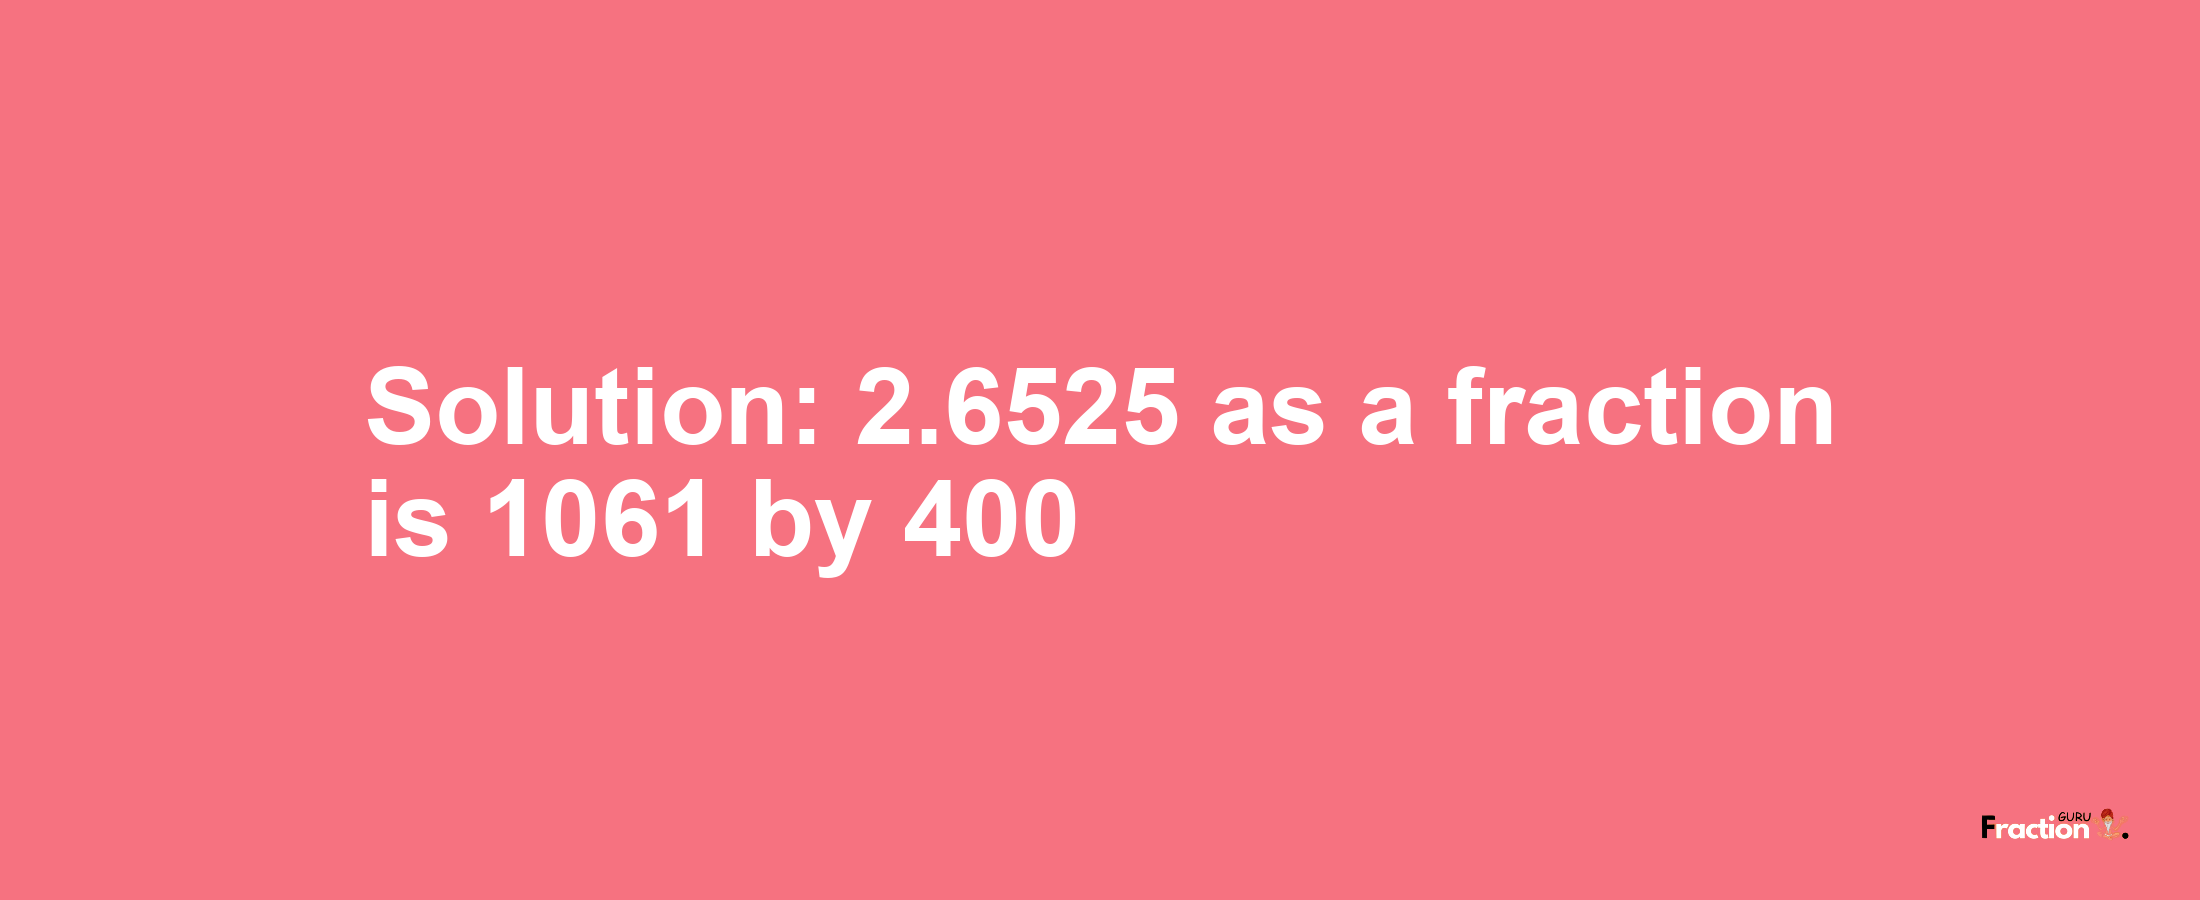 Solution:2.6525 as a fraction is 1061/400